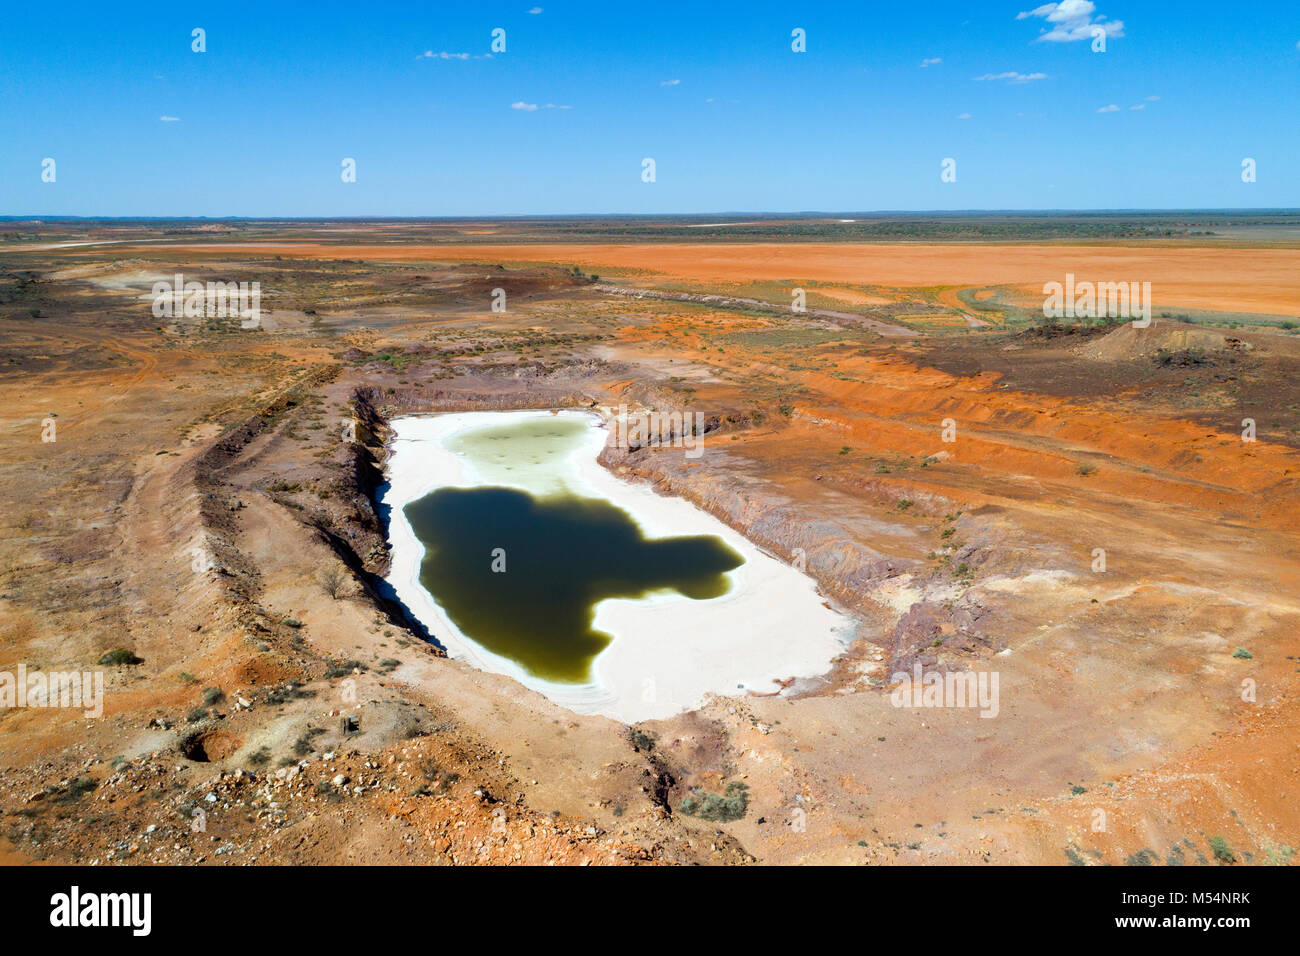 Aerial view of abandoned open cut gold mine that has filled with water turning to salt,, Meekathara, Murchison, Western Australia Stock Photo